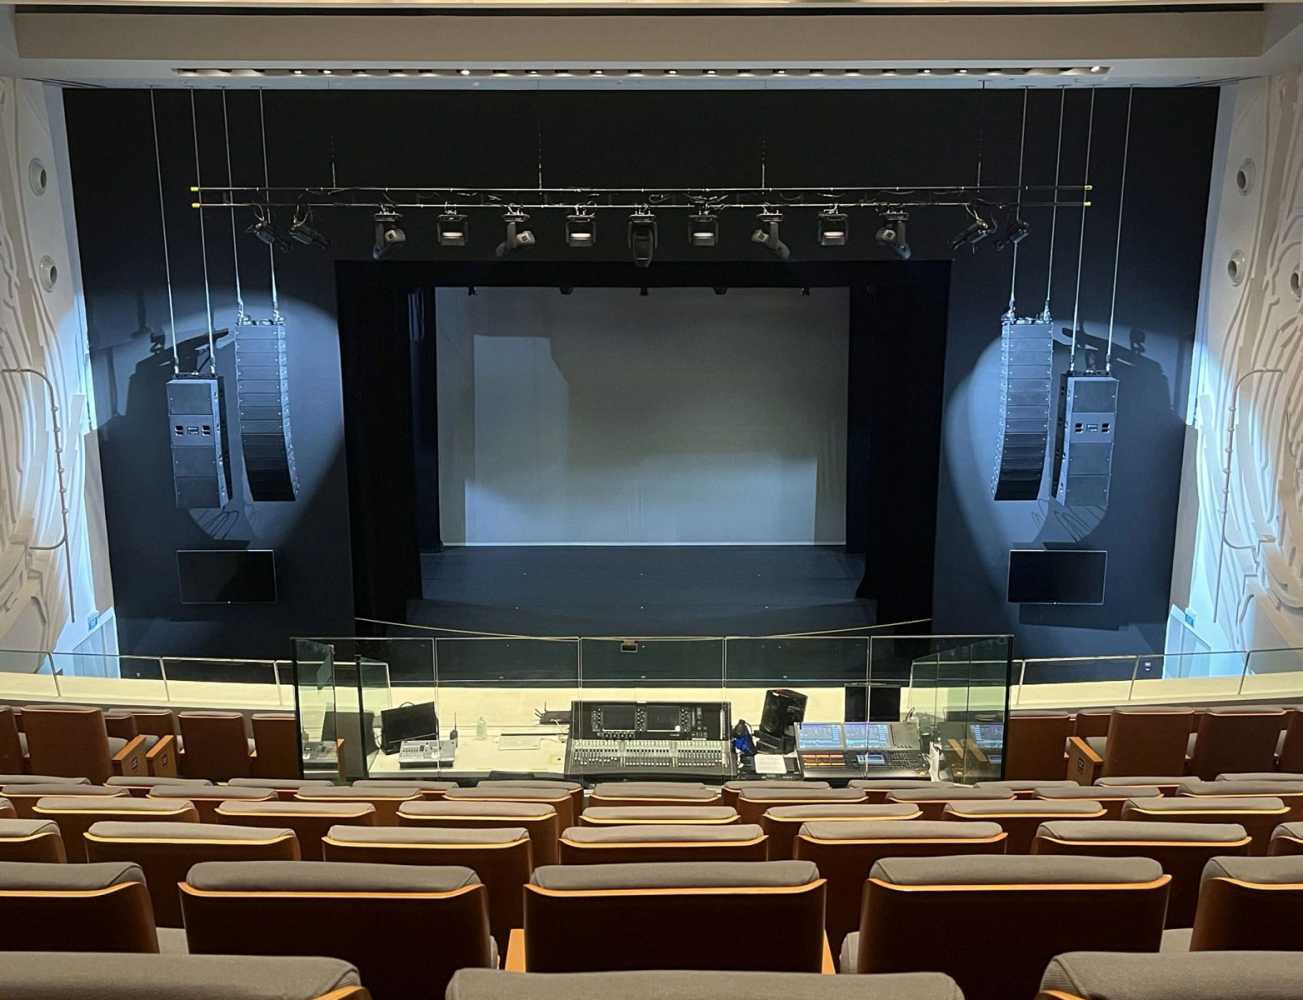 The theatre features several performance spaces, including a 922-seat auditorium